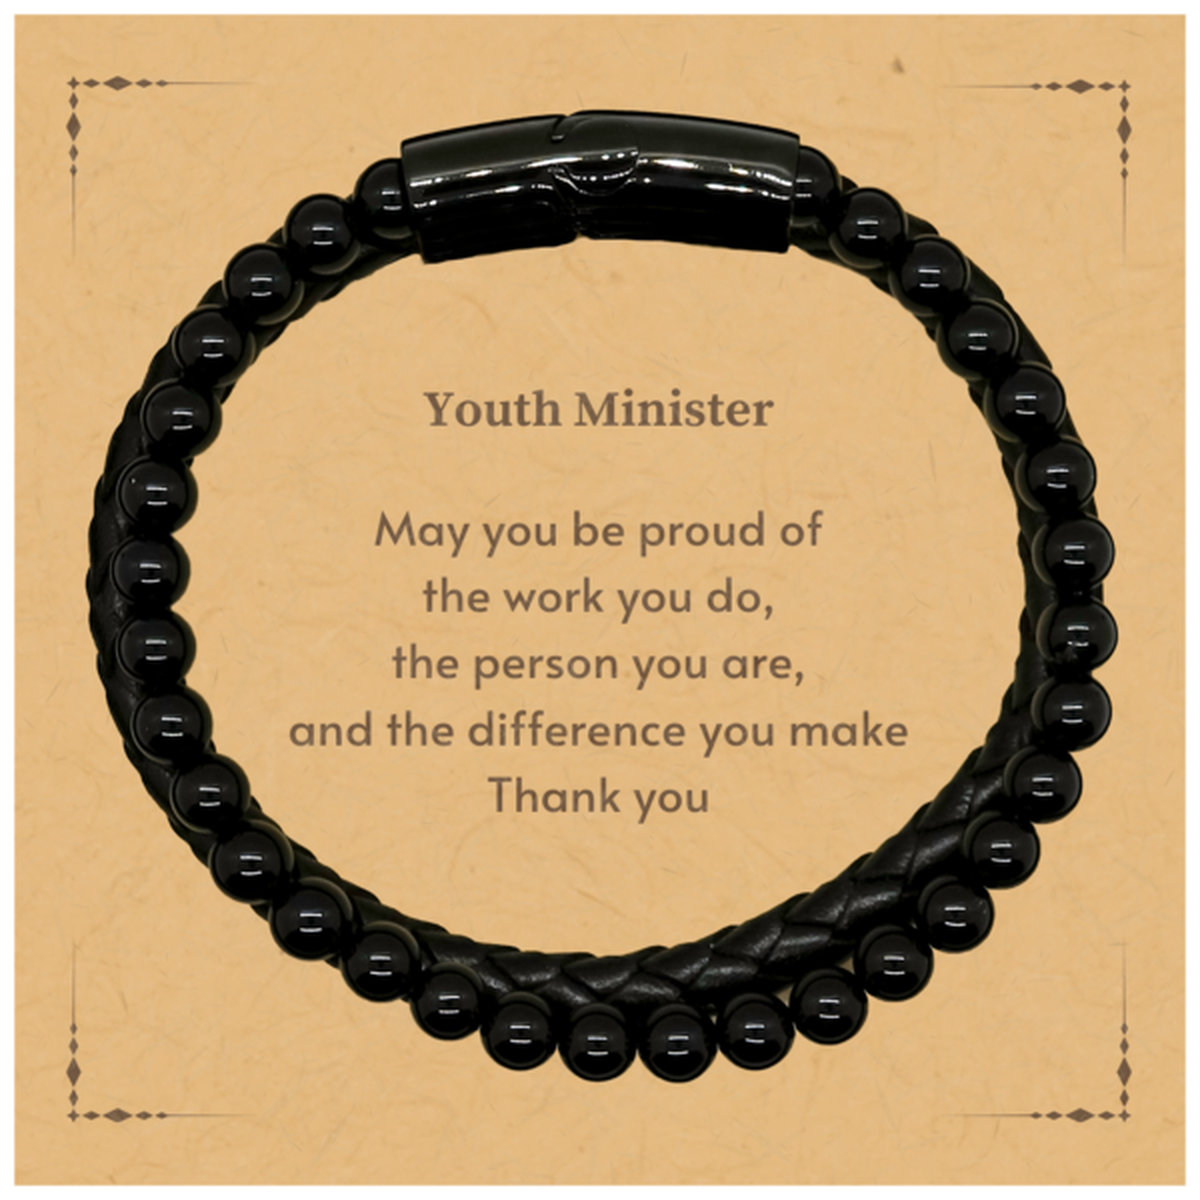 Heartwarming Stone Leather Bracelets Retirement Coworkers Gifts for Youth Minister, Youth Minister May You be proud of the work you do, the person you are Gifts for Boss Men Women Friends